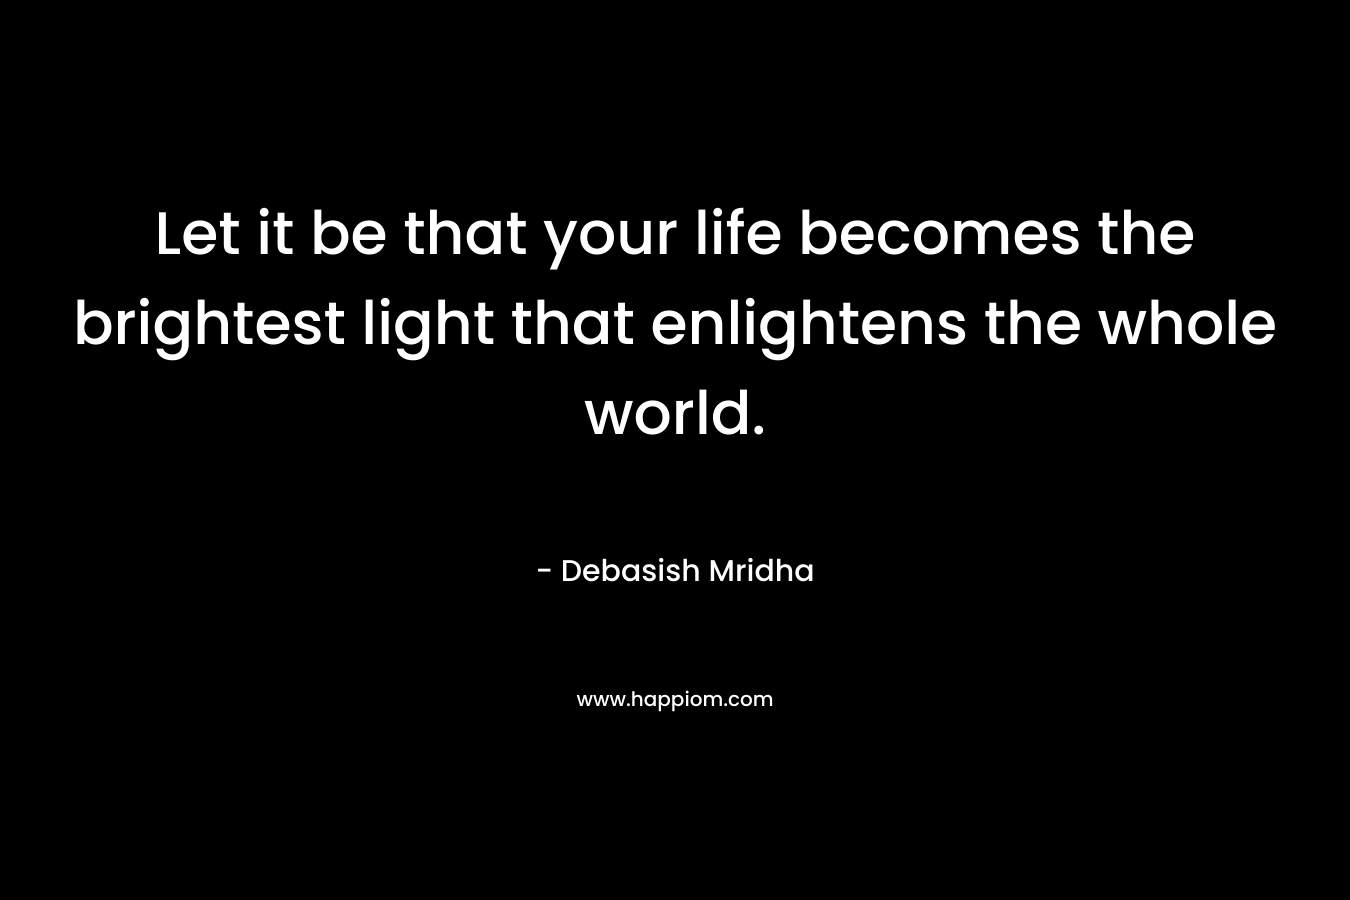 Let it be that your life becomes the brightest light that enlightens the whole world.